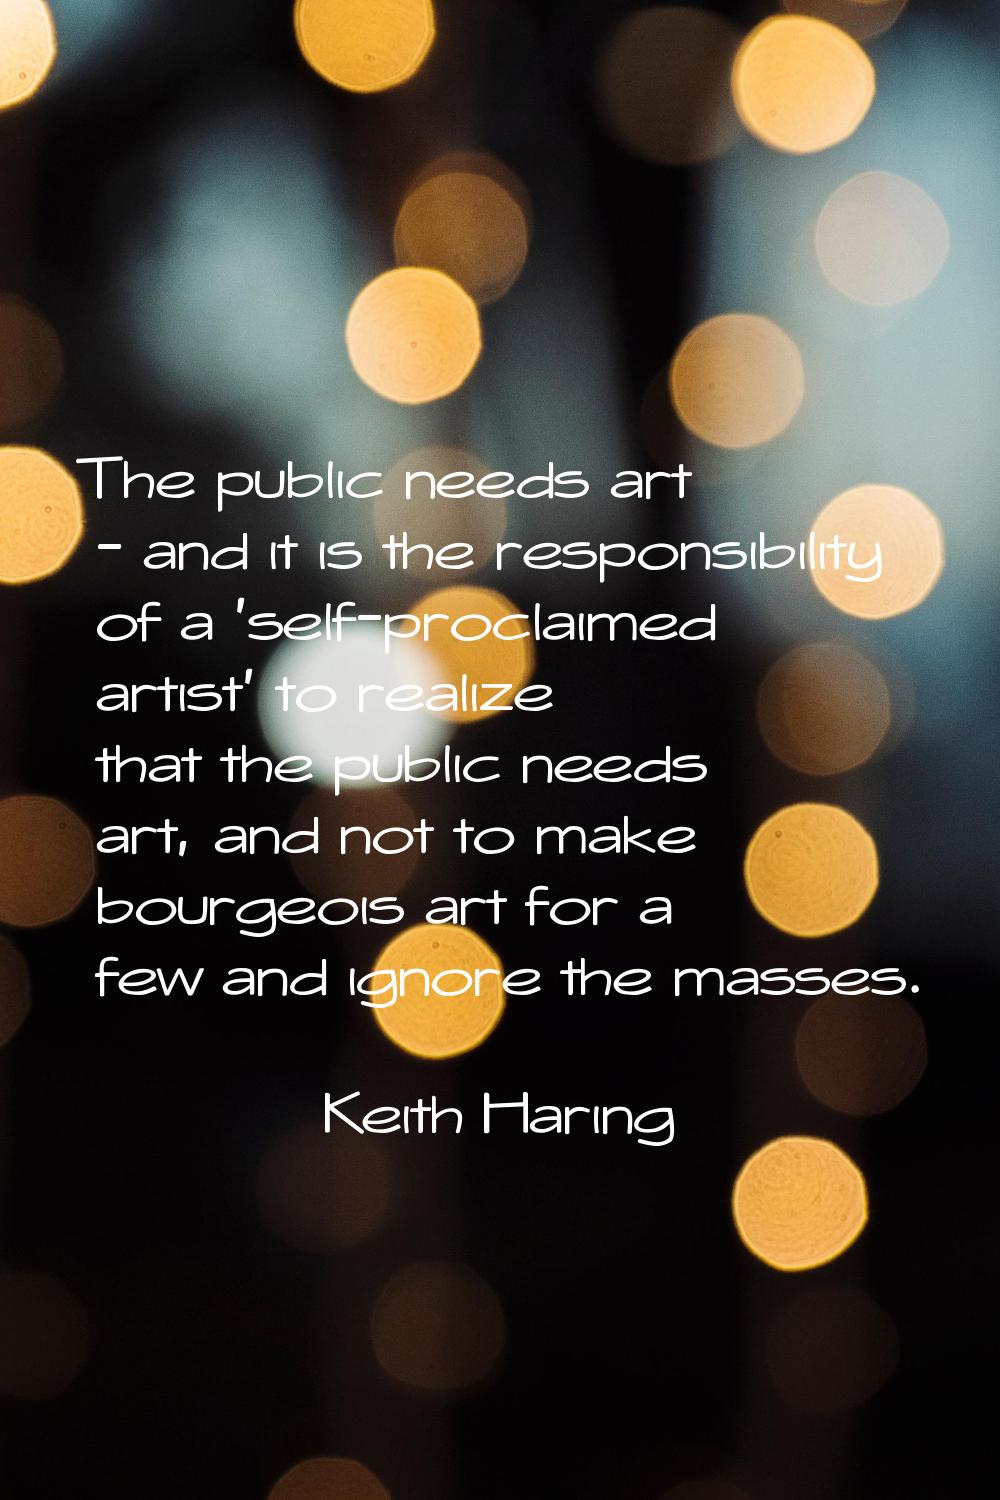 The public needs art - and it is the responsibility of a 'self-proclaimed artist' to realize that t